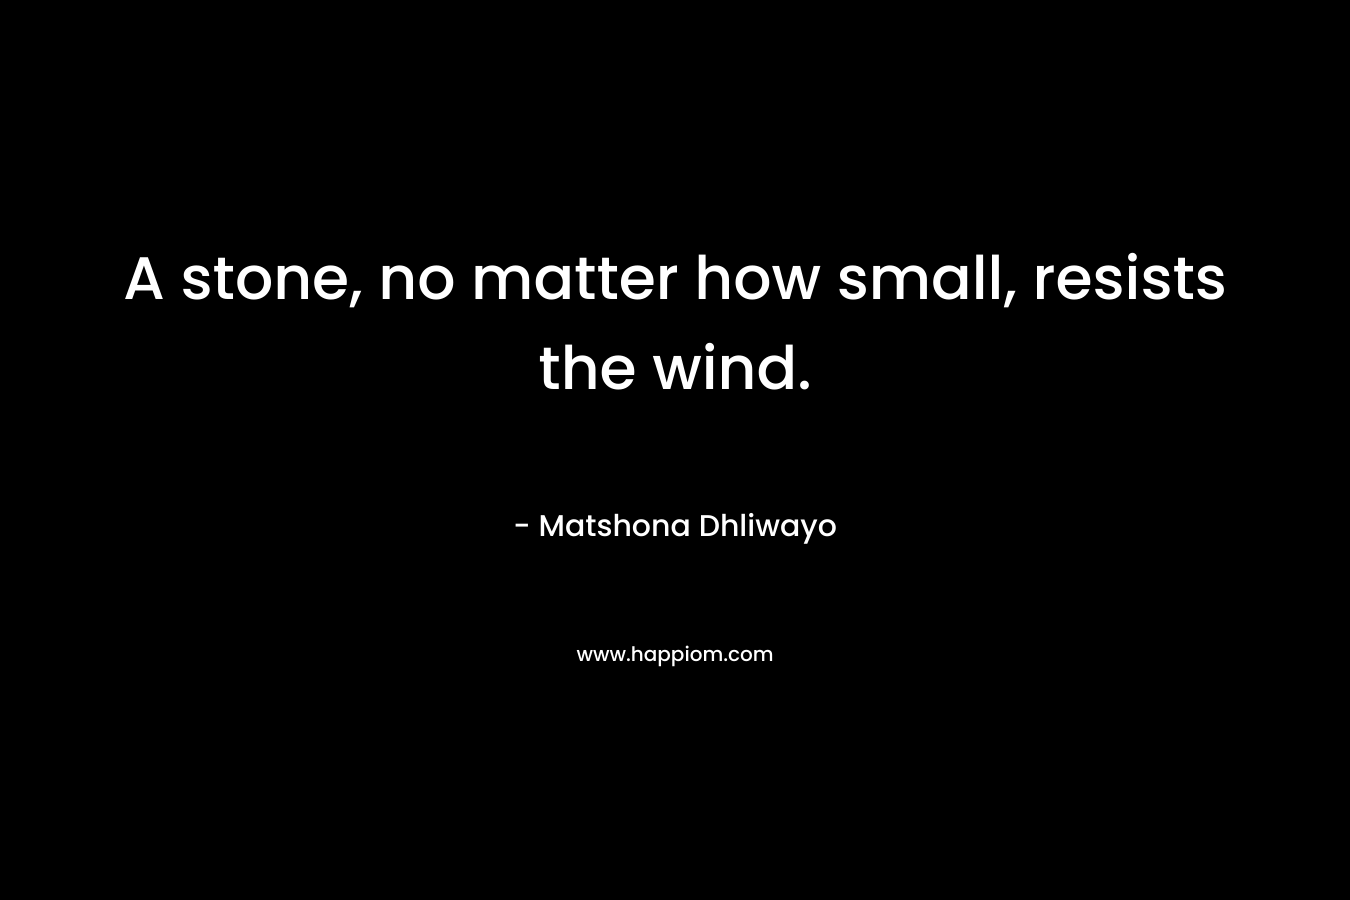 A stone, no matter how small, resists the wind. – Matshona Dhliwayo